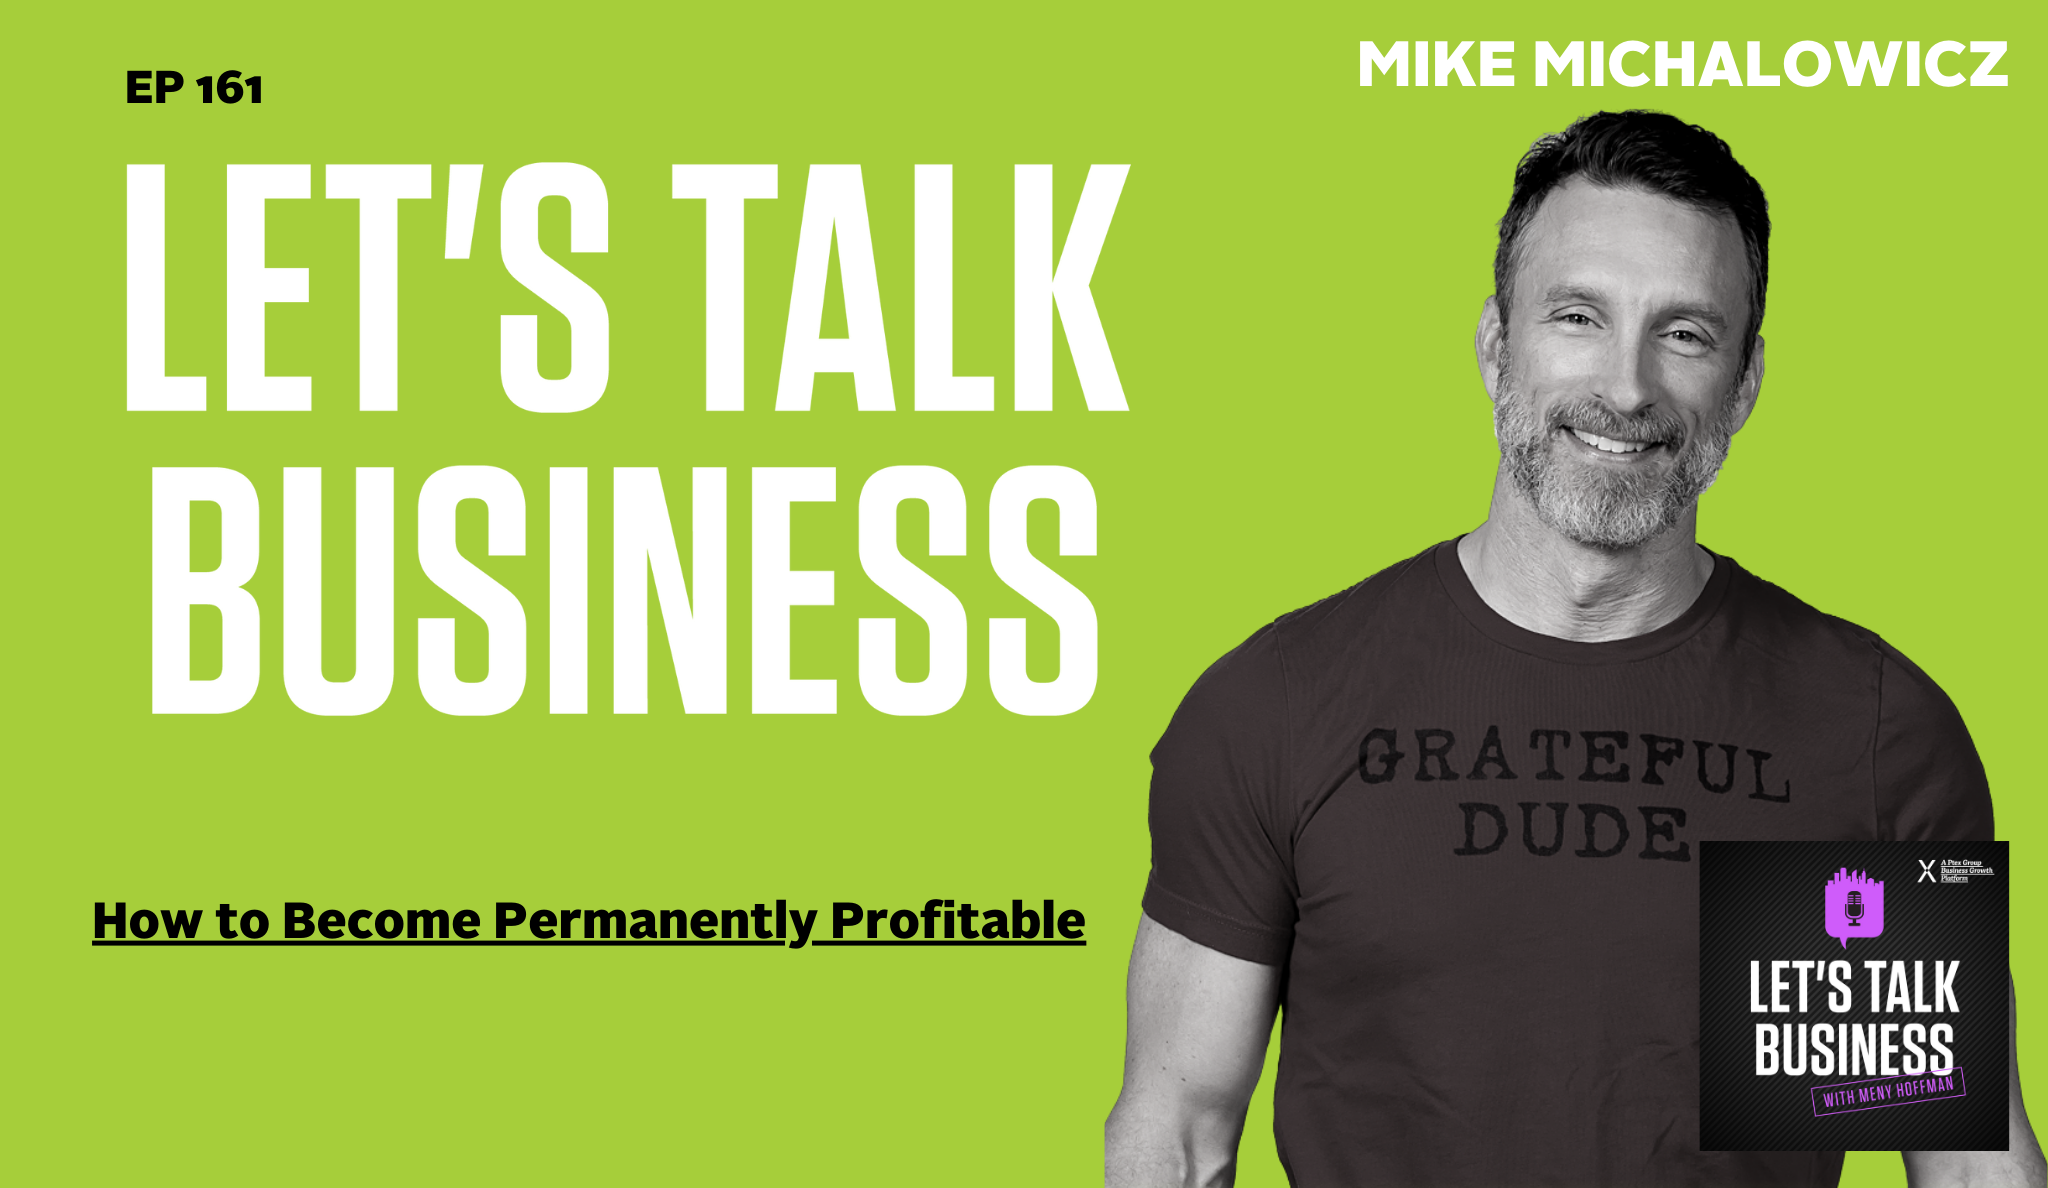 How to Become Permanently Profitable with Mike Michalowicz